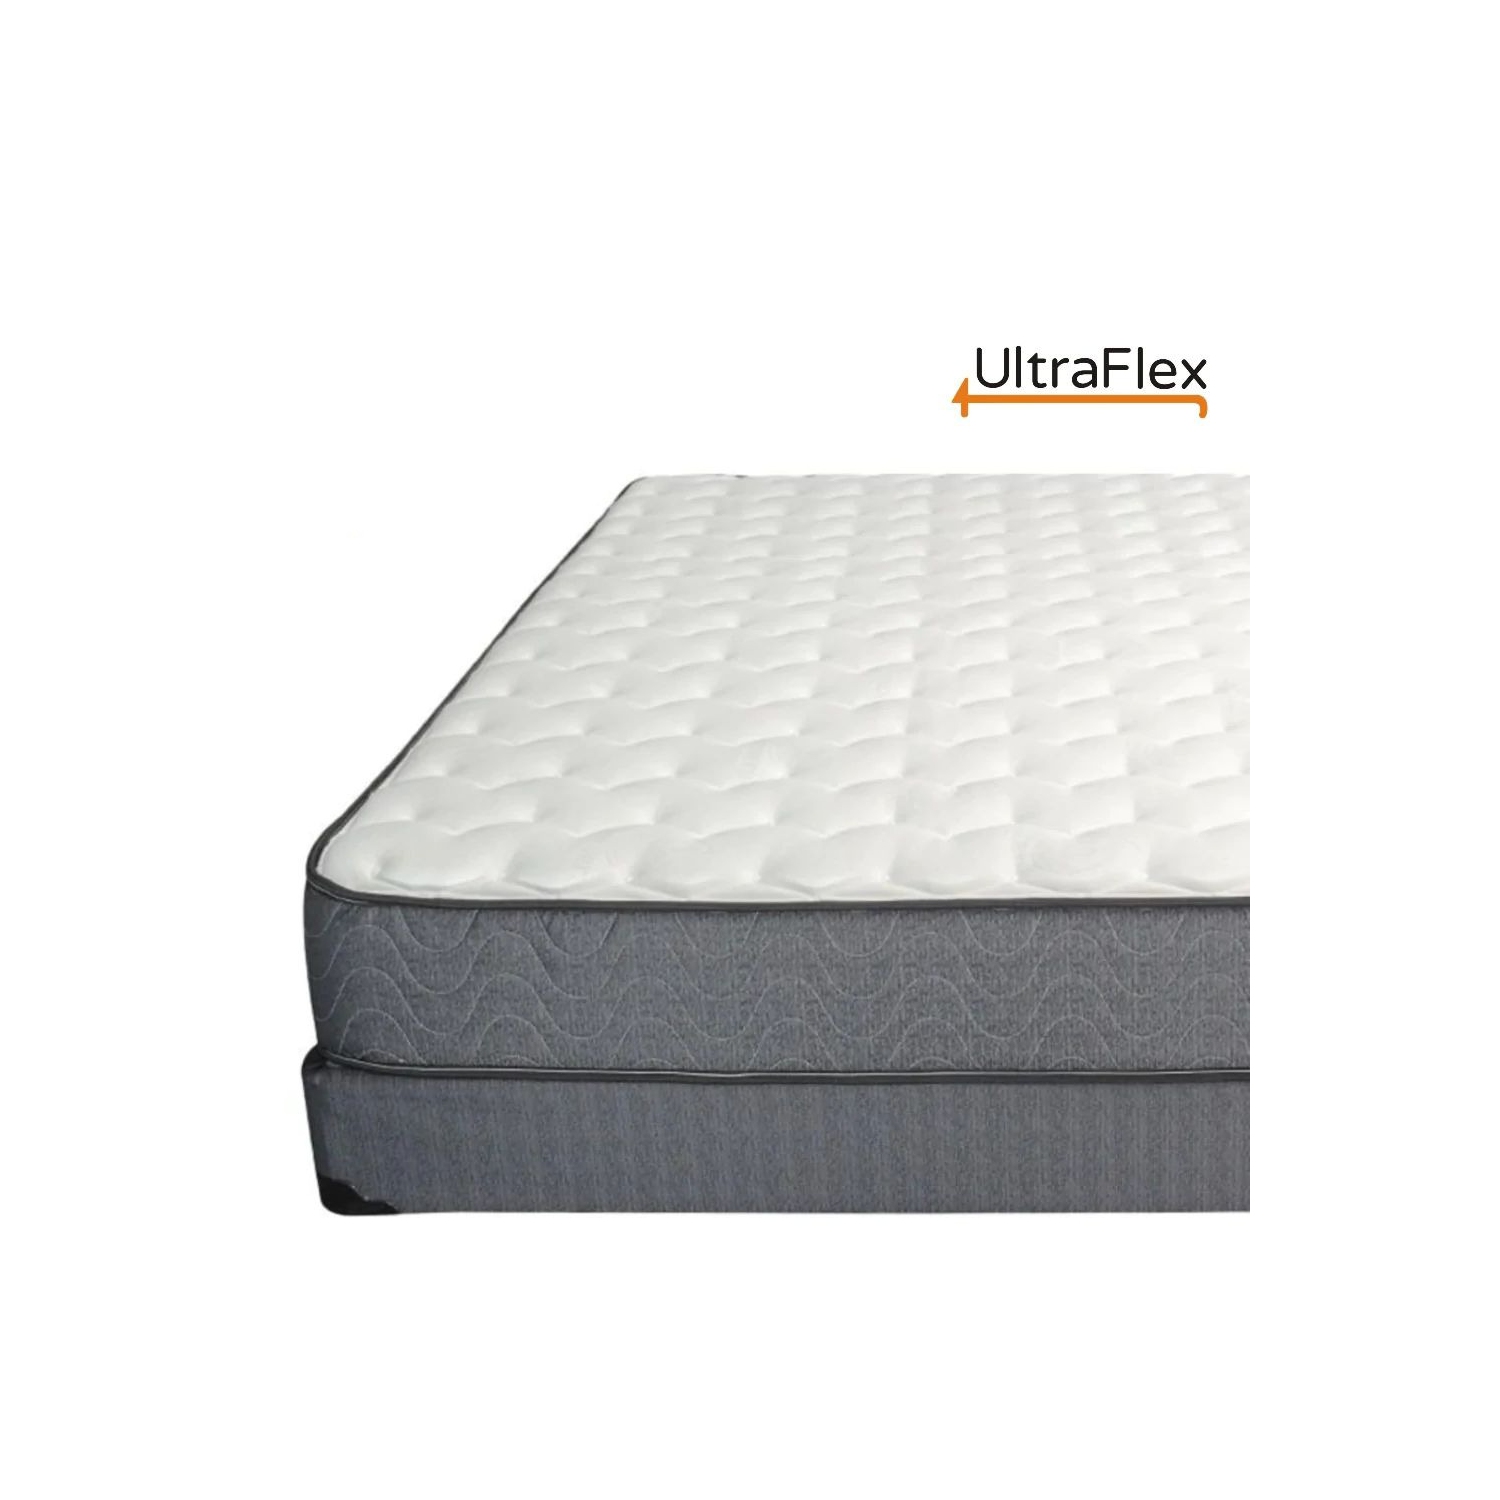 Alloech 14 Deep Blue and White Soft Breathable Comfort Memory Foam  Mattress Quick use & Reviews